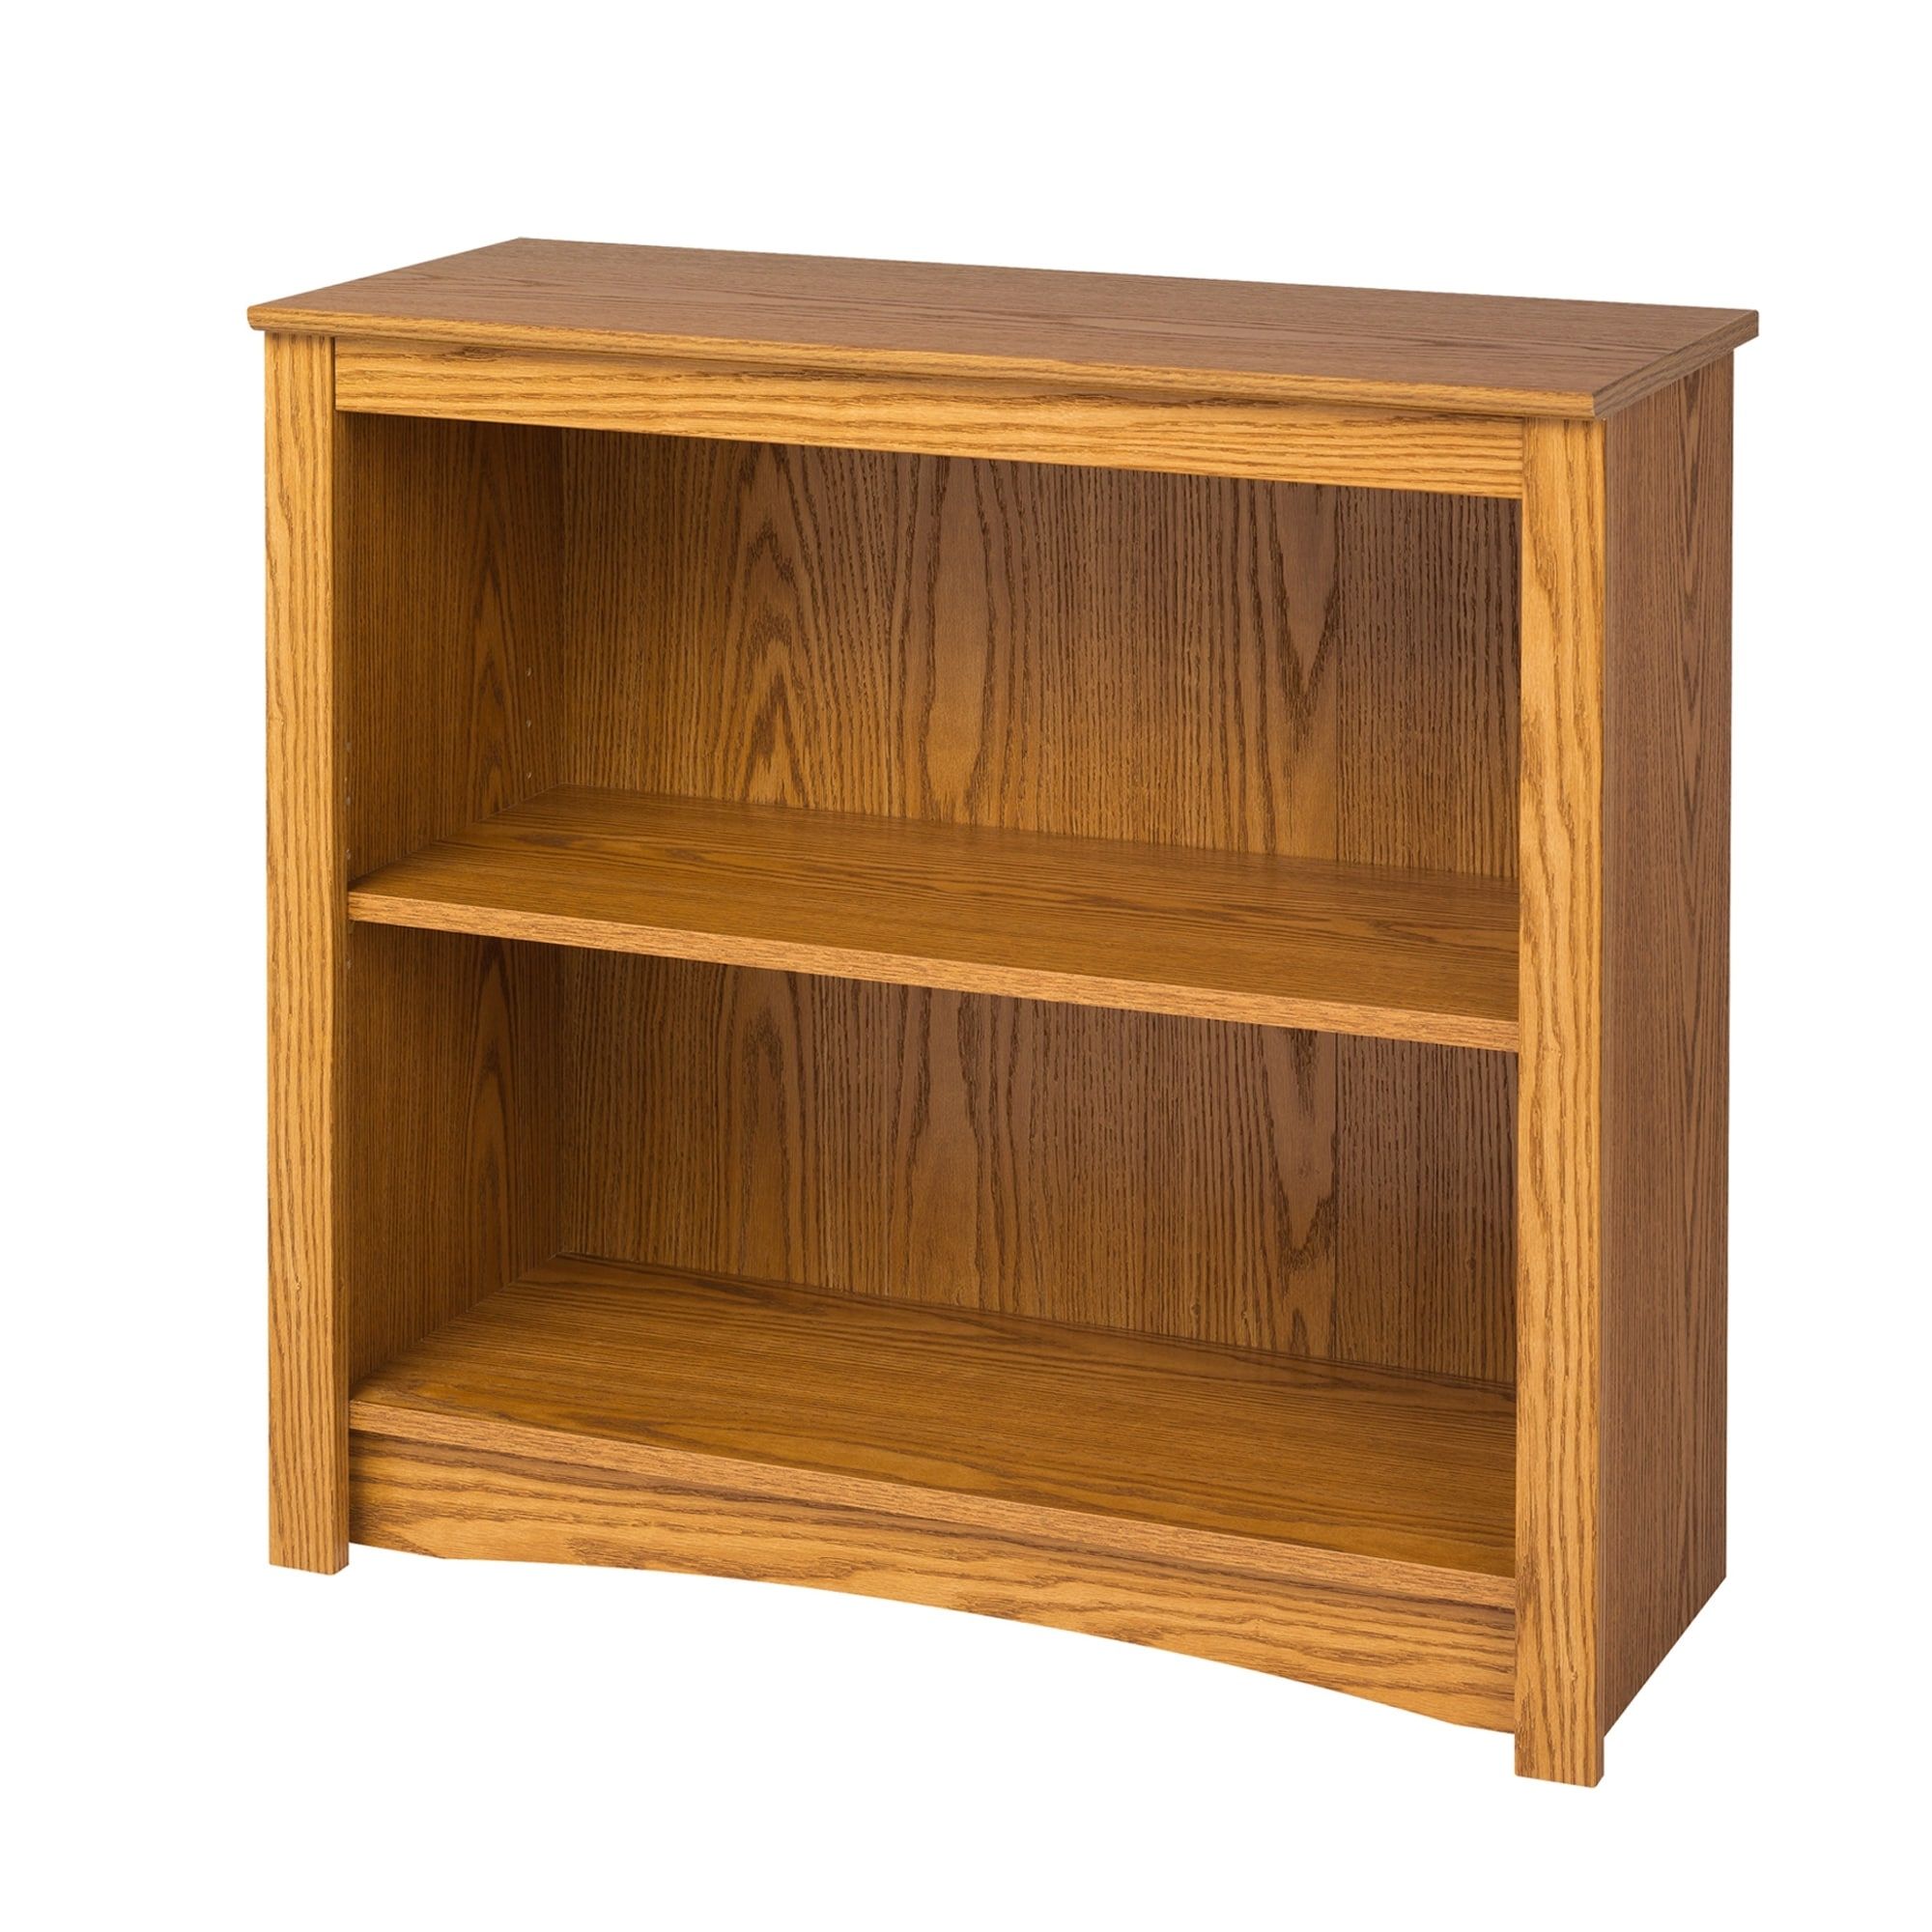 2 Shelf Bookcase – Free Shipping Today – Overstock – 931667 Intended For Well Known 2 Shelf Bookcases (View 14 of 15)